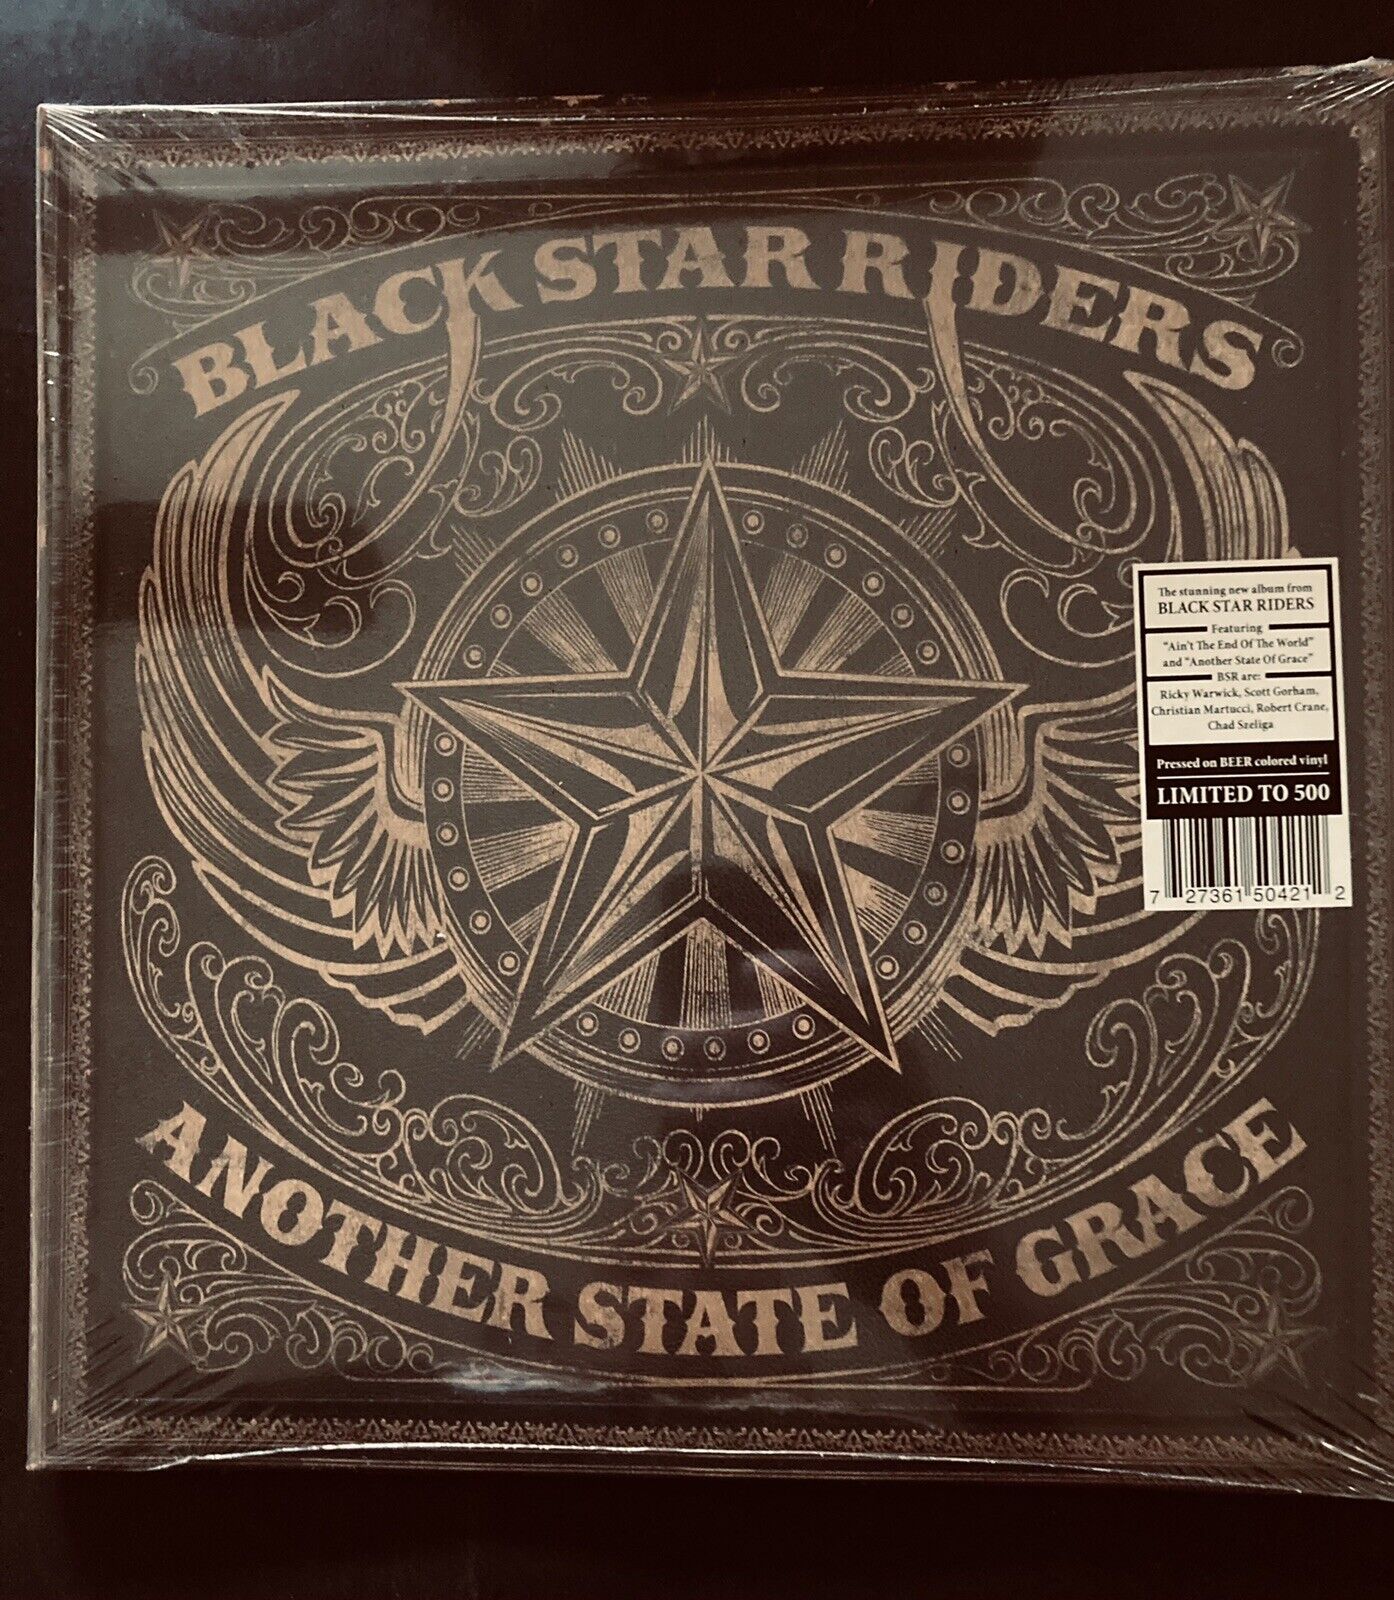 Black Star Riders Another State Of Grace Limited 500 Beer splatter Vinyl